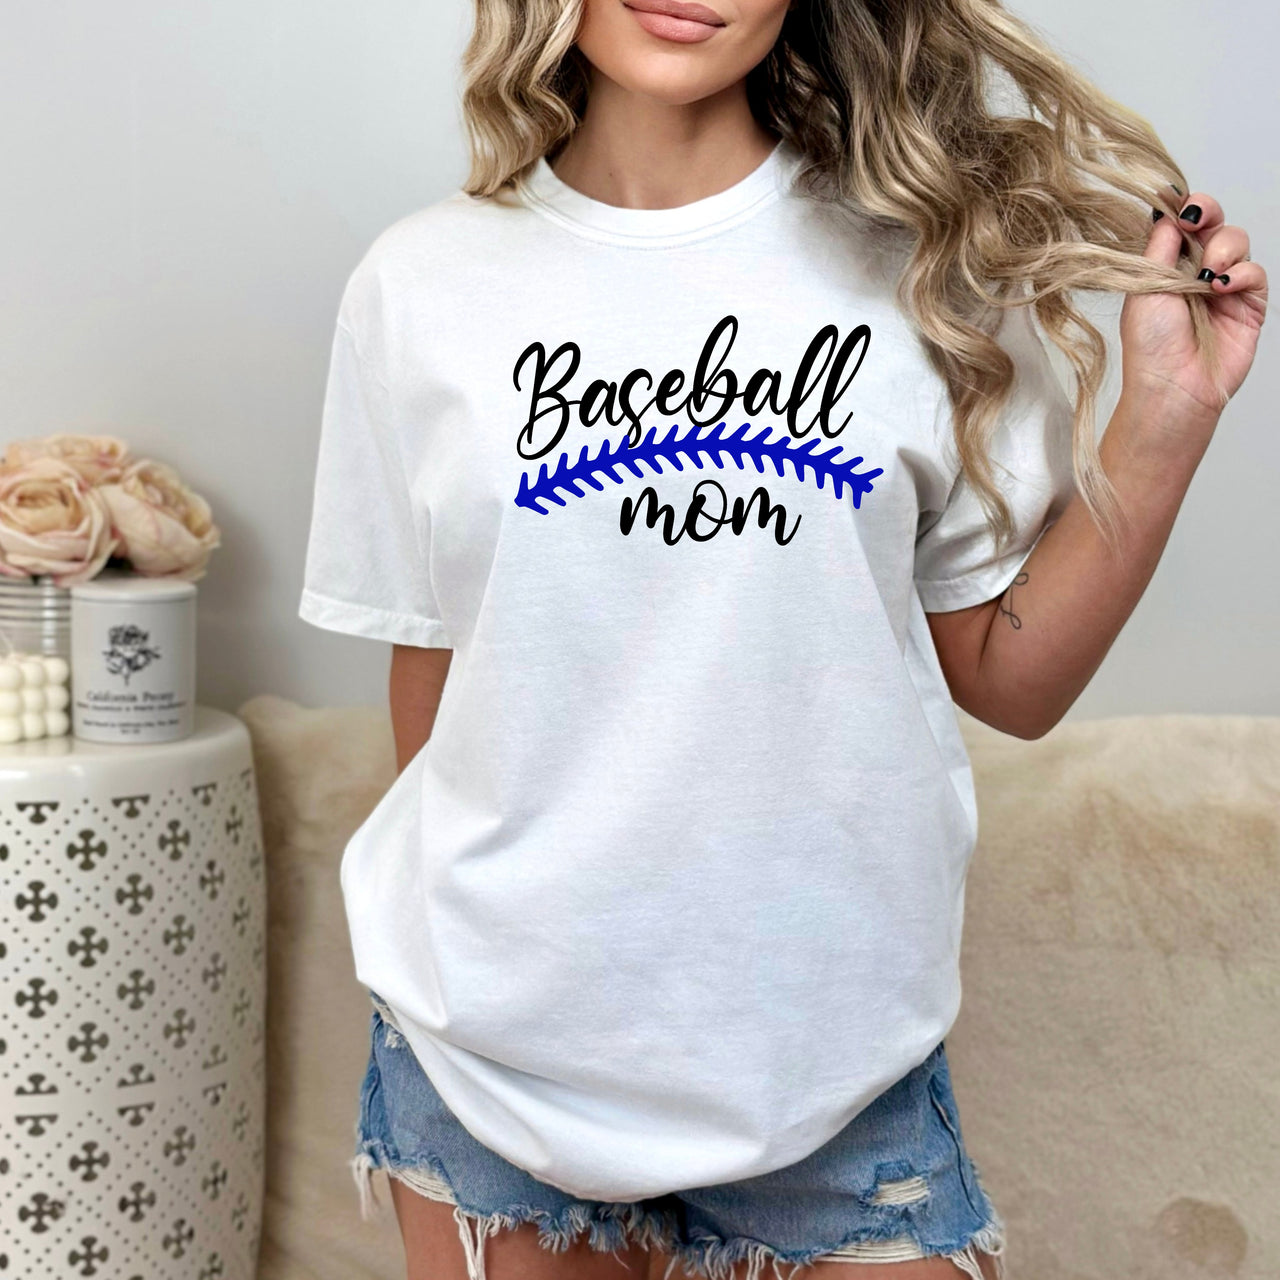 Baseball Mom (You pick the lace color)- Comfort Colors Garment-Dyed Tee